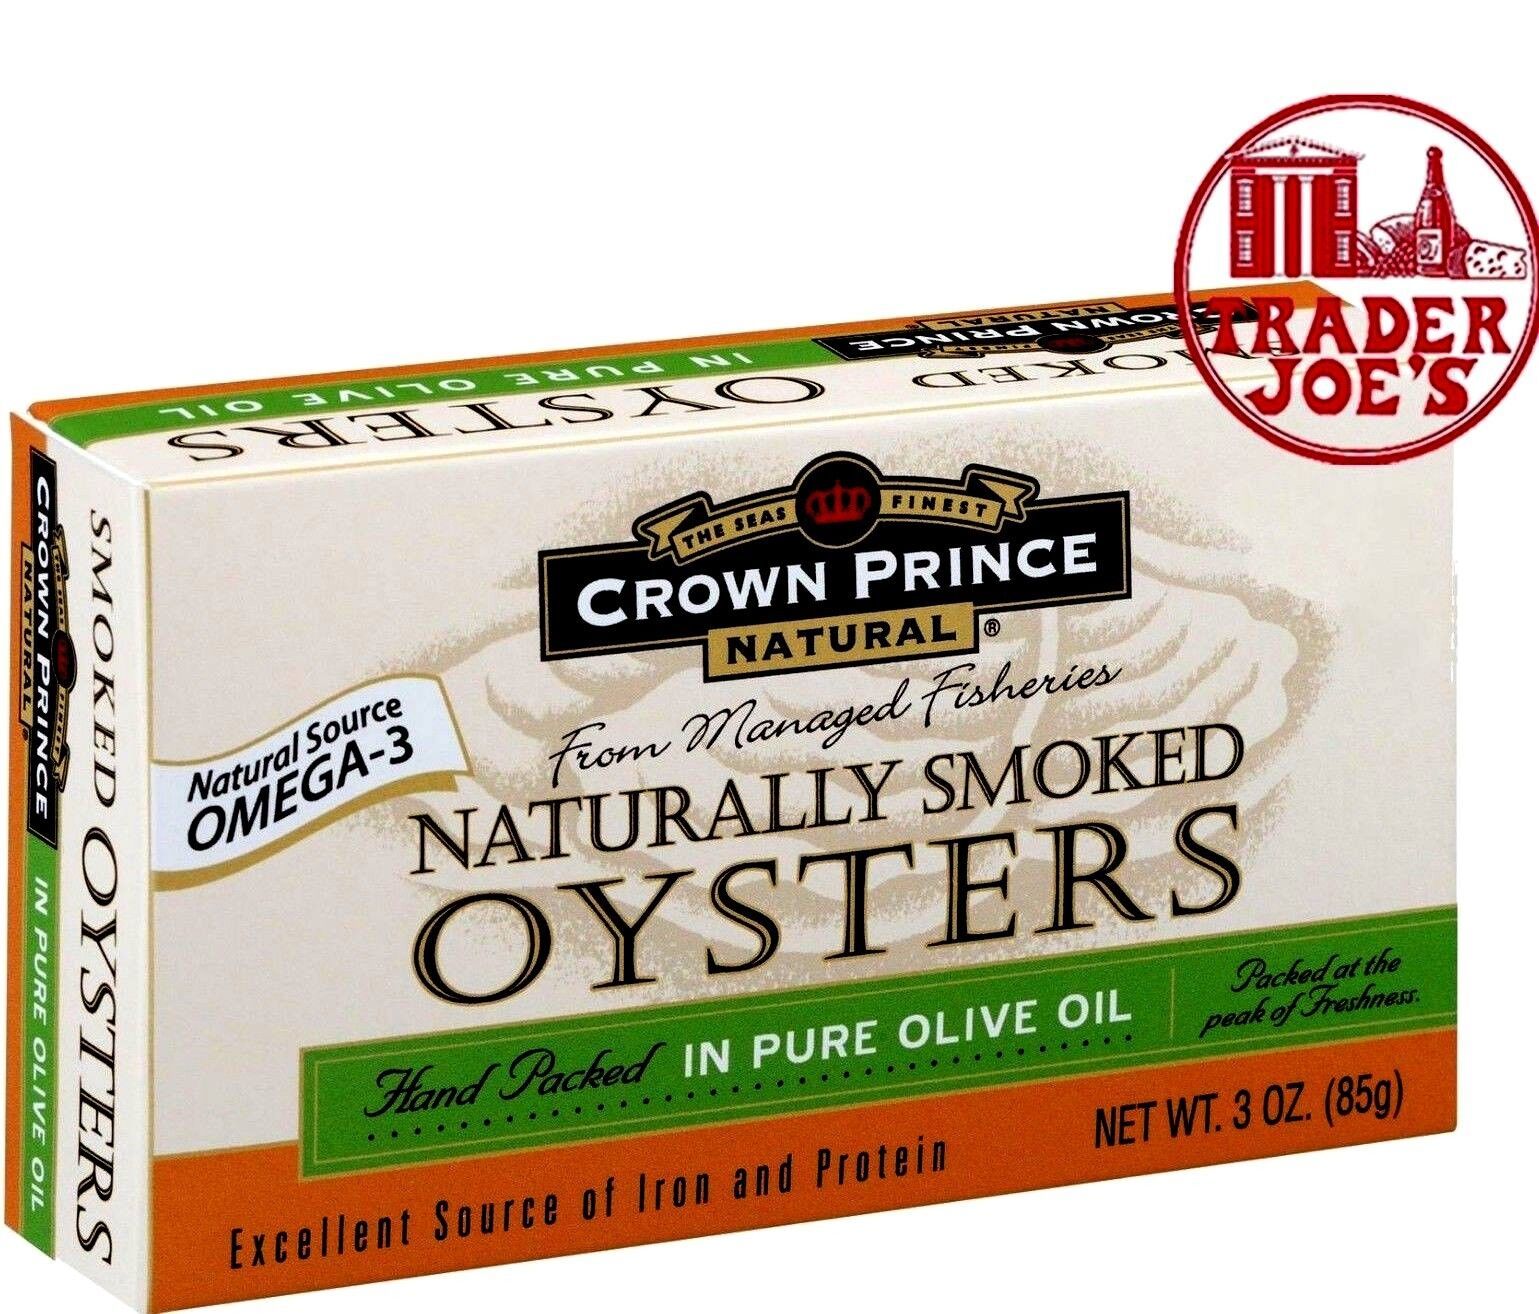 Primary image for Trader Joe's Crown Prince Natural Smoked Oysters in Pure Olive Oil 3.0oz